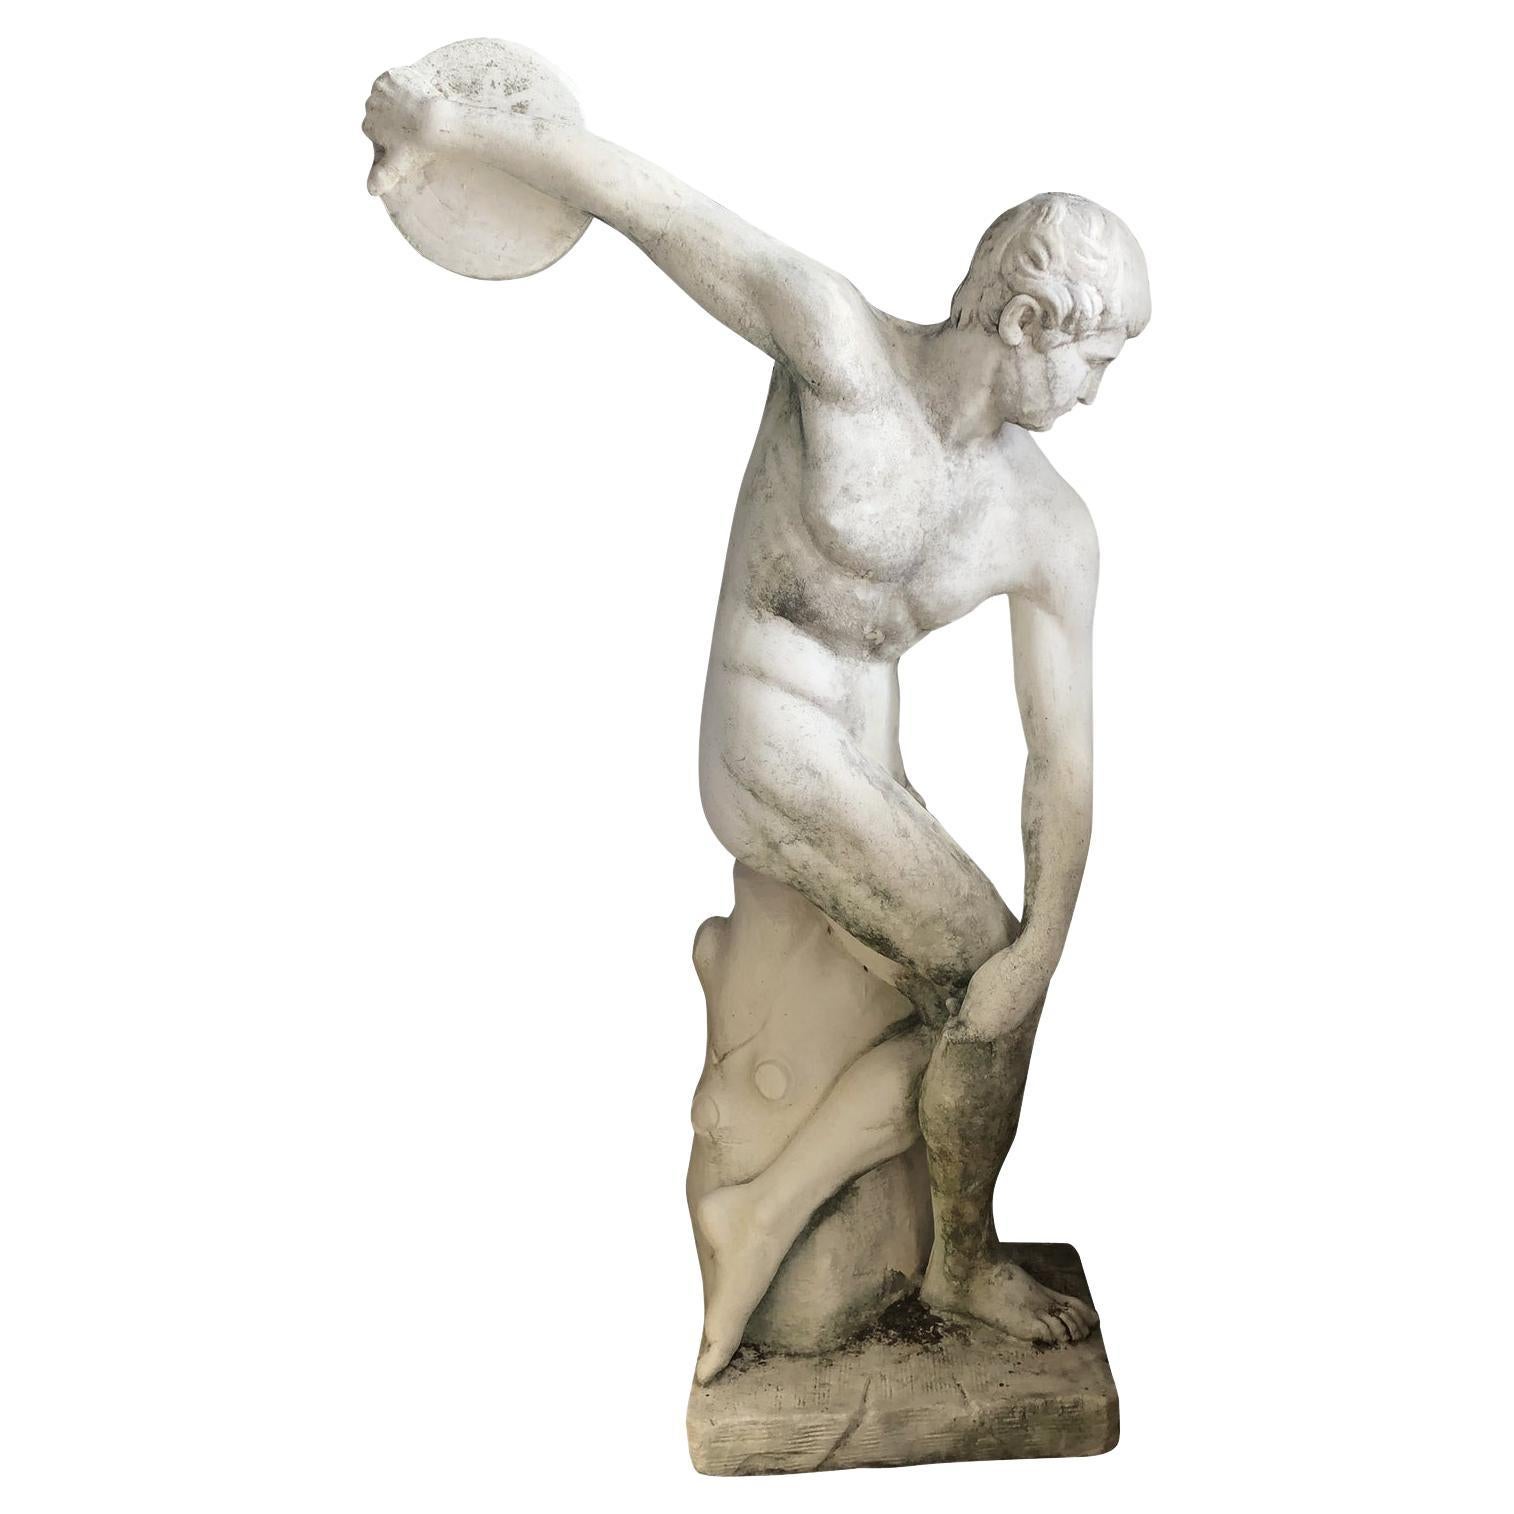 Mid 20th Century Concrete Discus Thrower Statue For Sale